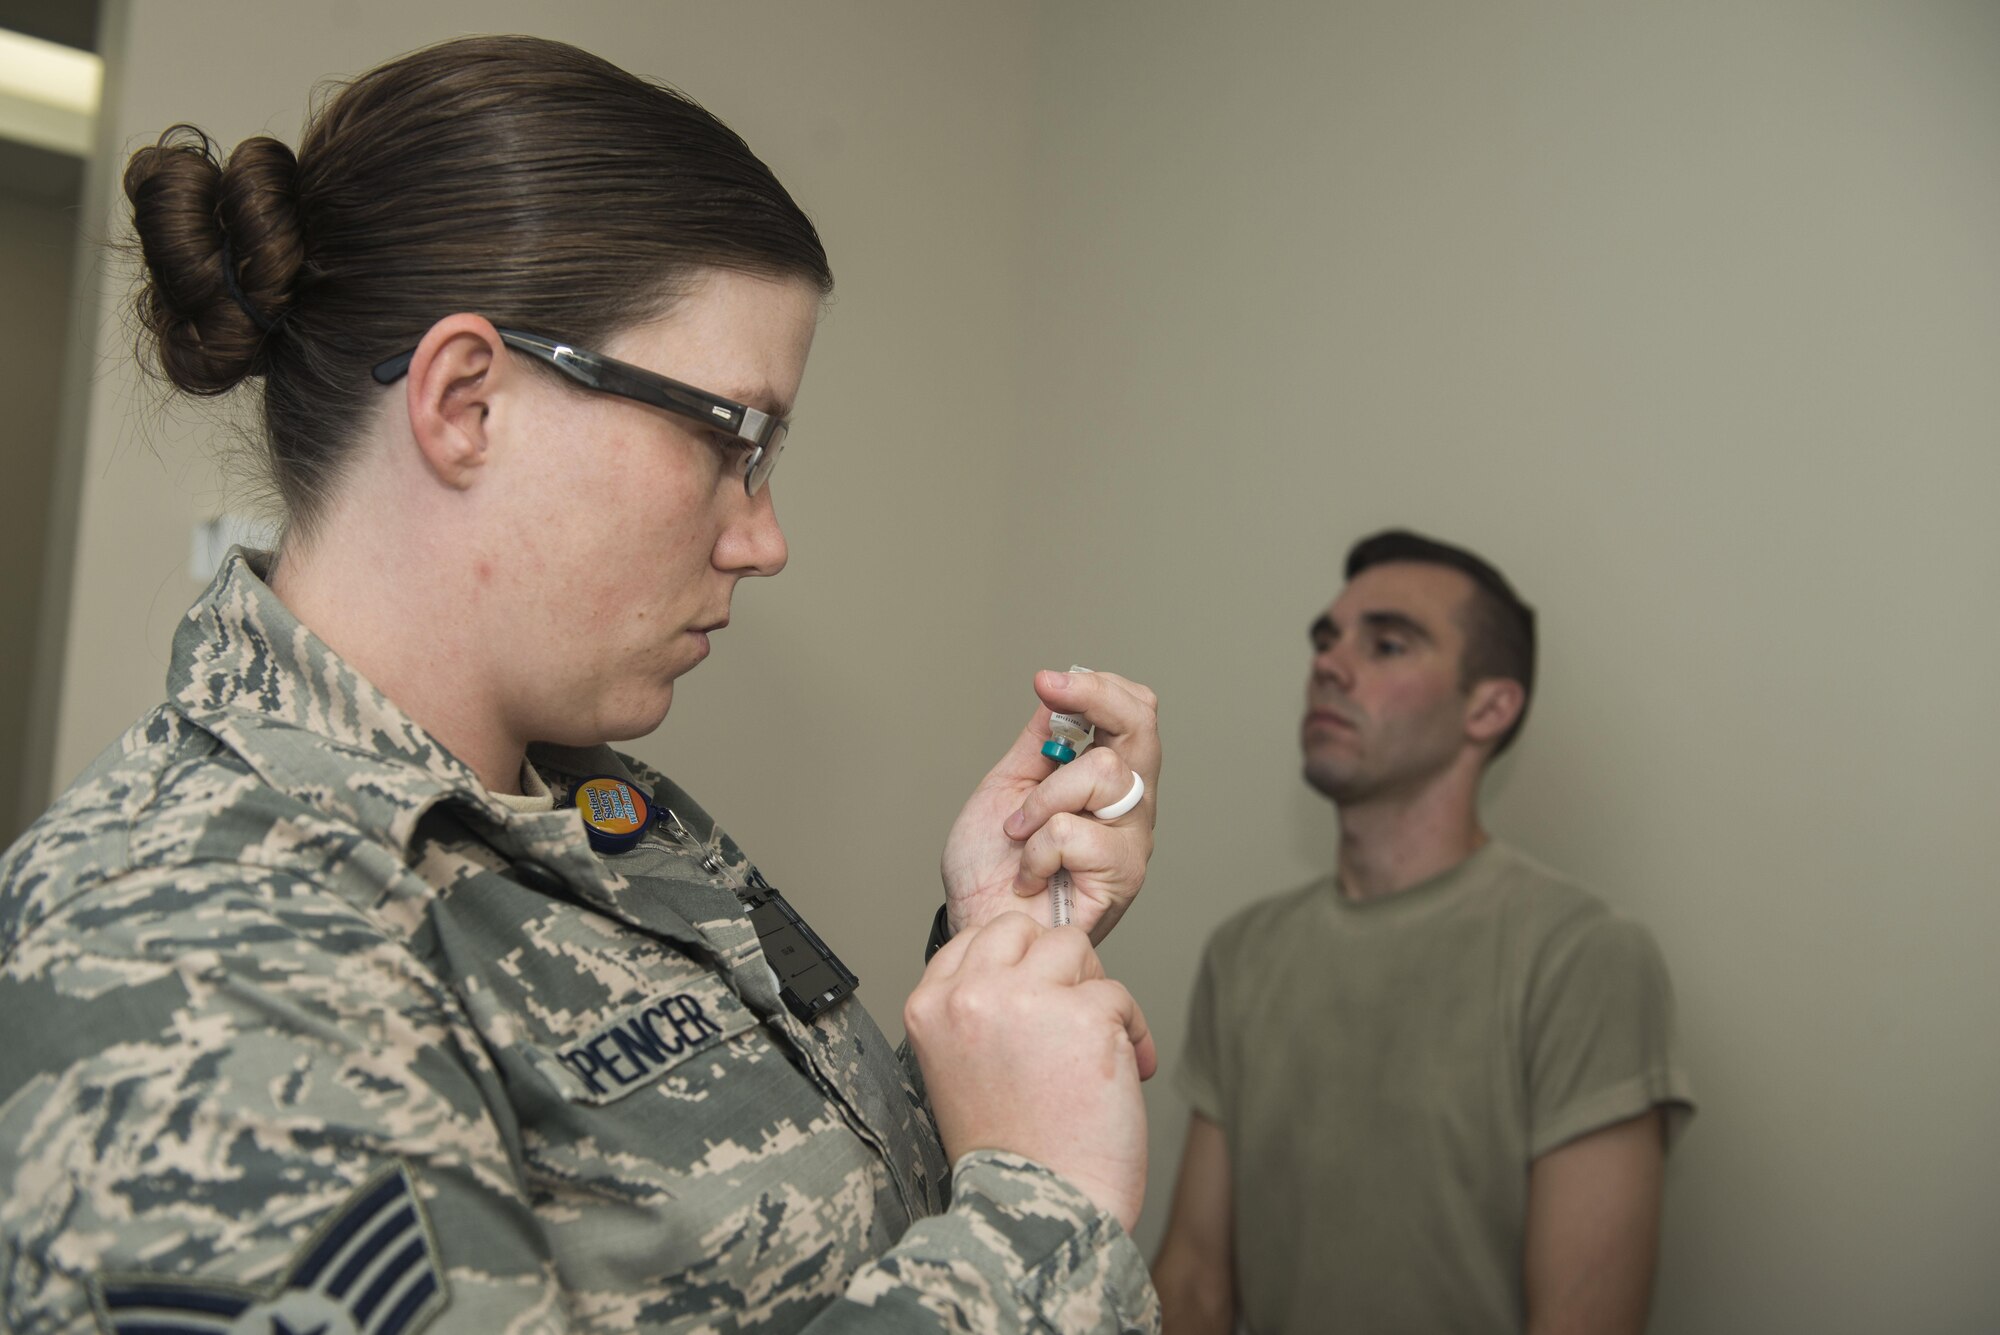 U.S. Air Force Staff Sgt. Jake Spencer, 20th Medical Operations Squadron immunizations backup technician, prepares a vaccine for Capt. Adam Gadson, 20th Logistics Readiness Squadron operations officer, at Shaw Air Force Base, South Carolina, Oct. 23, 2017.